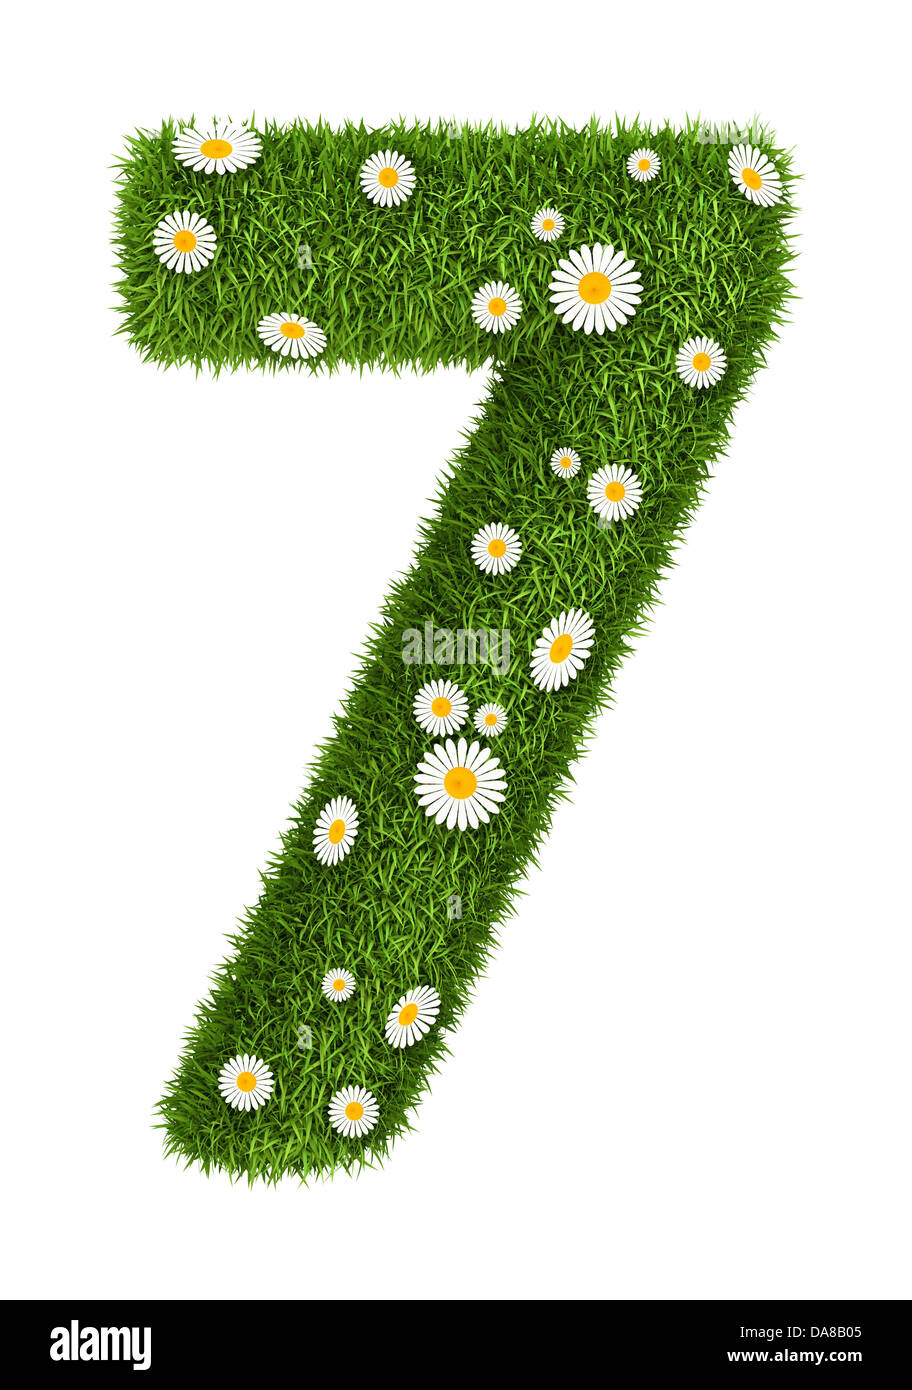 Natural grass number 7 Stock Photo